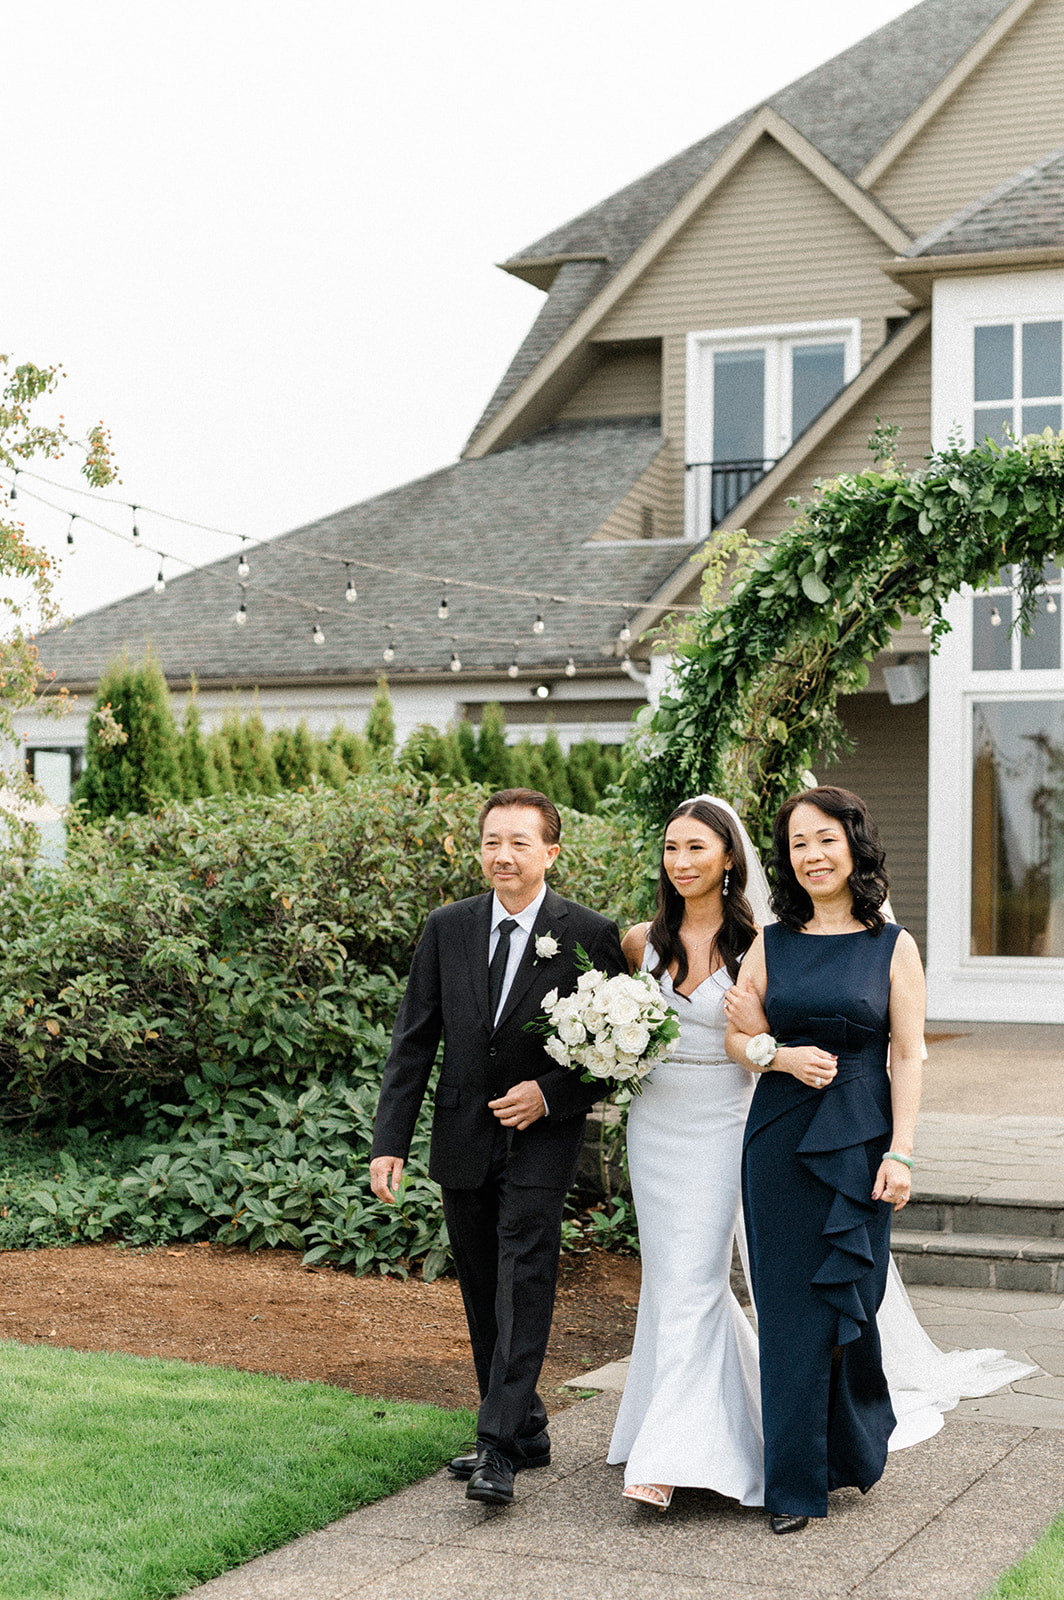 Bride's parents walk the bride down the aisle at her Oregon luxury wedding